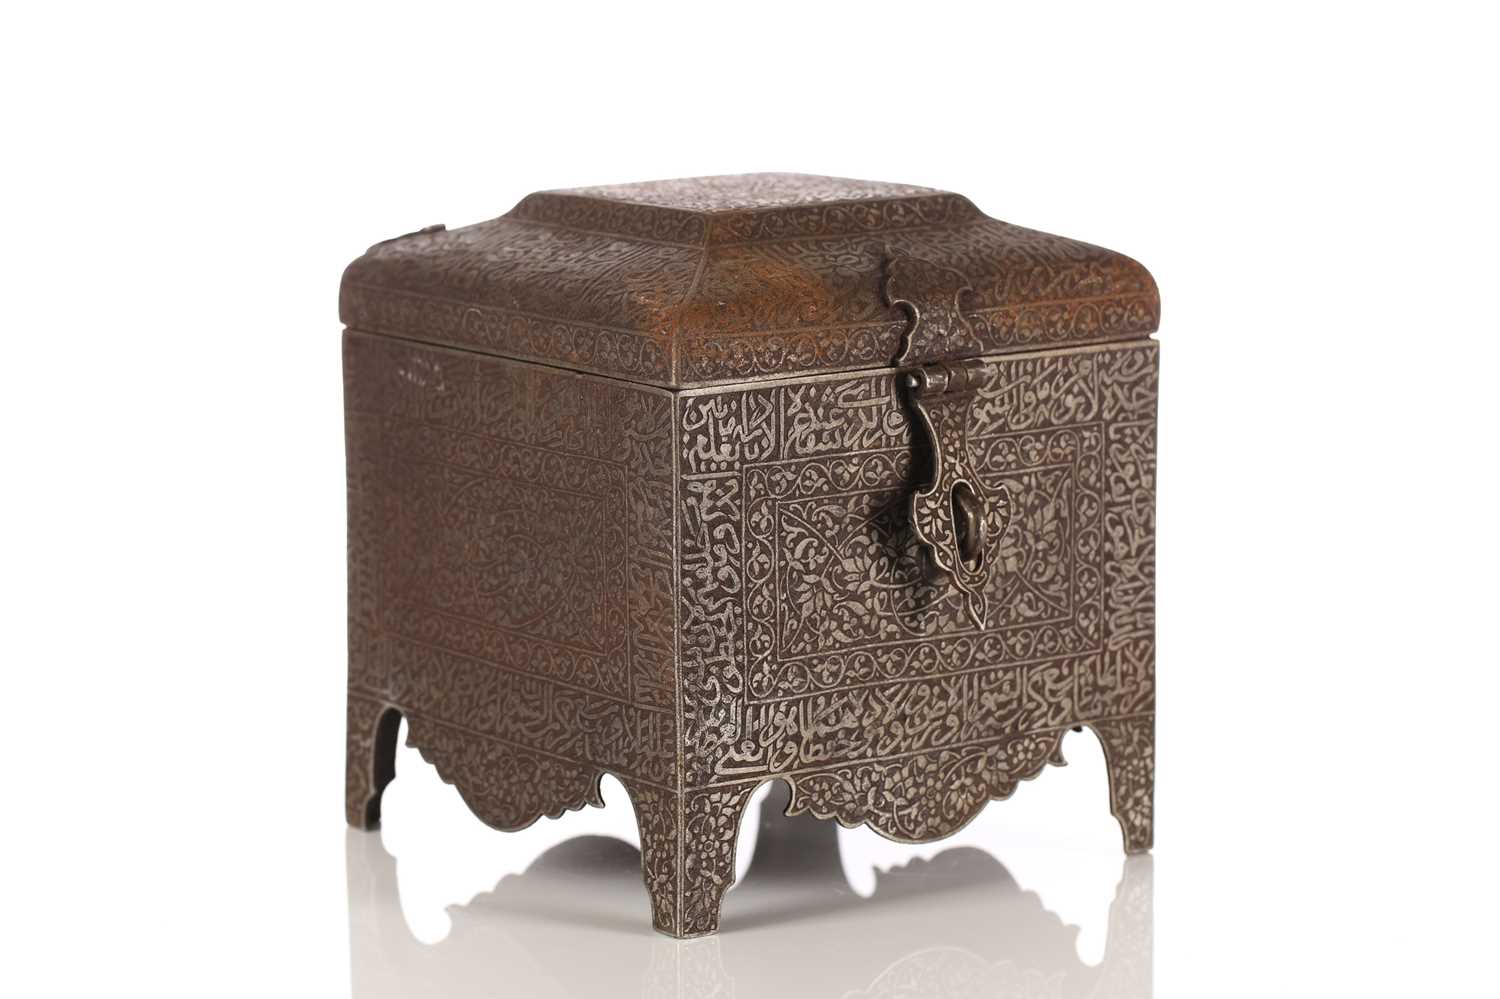 An Indo-Persian style steel box with moulded, hinged caddy top bearing intricate engraved Islamic